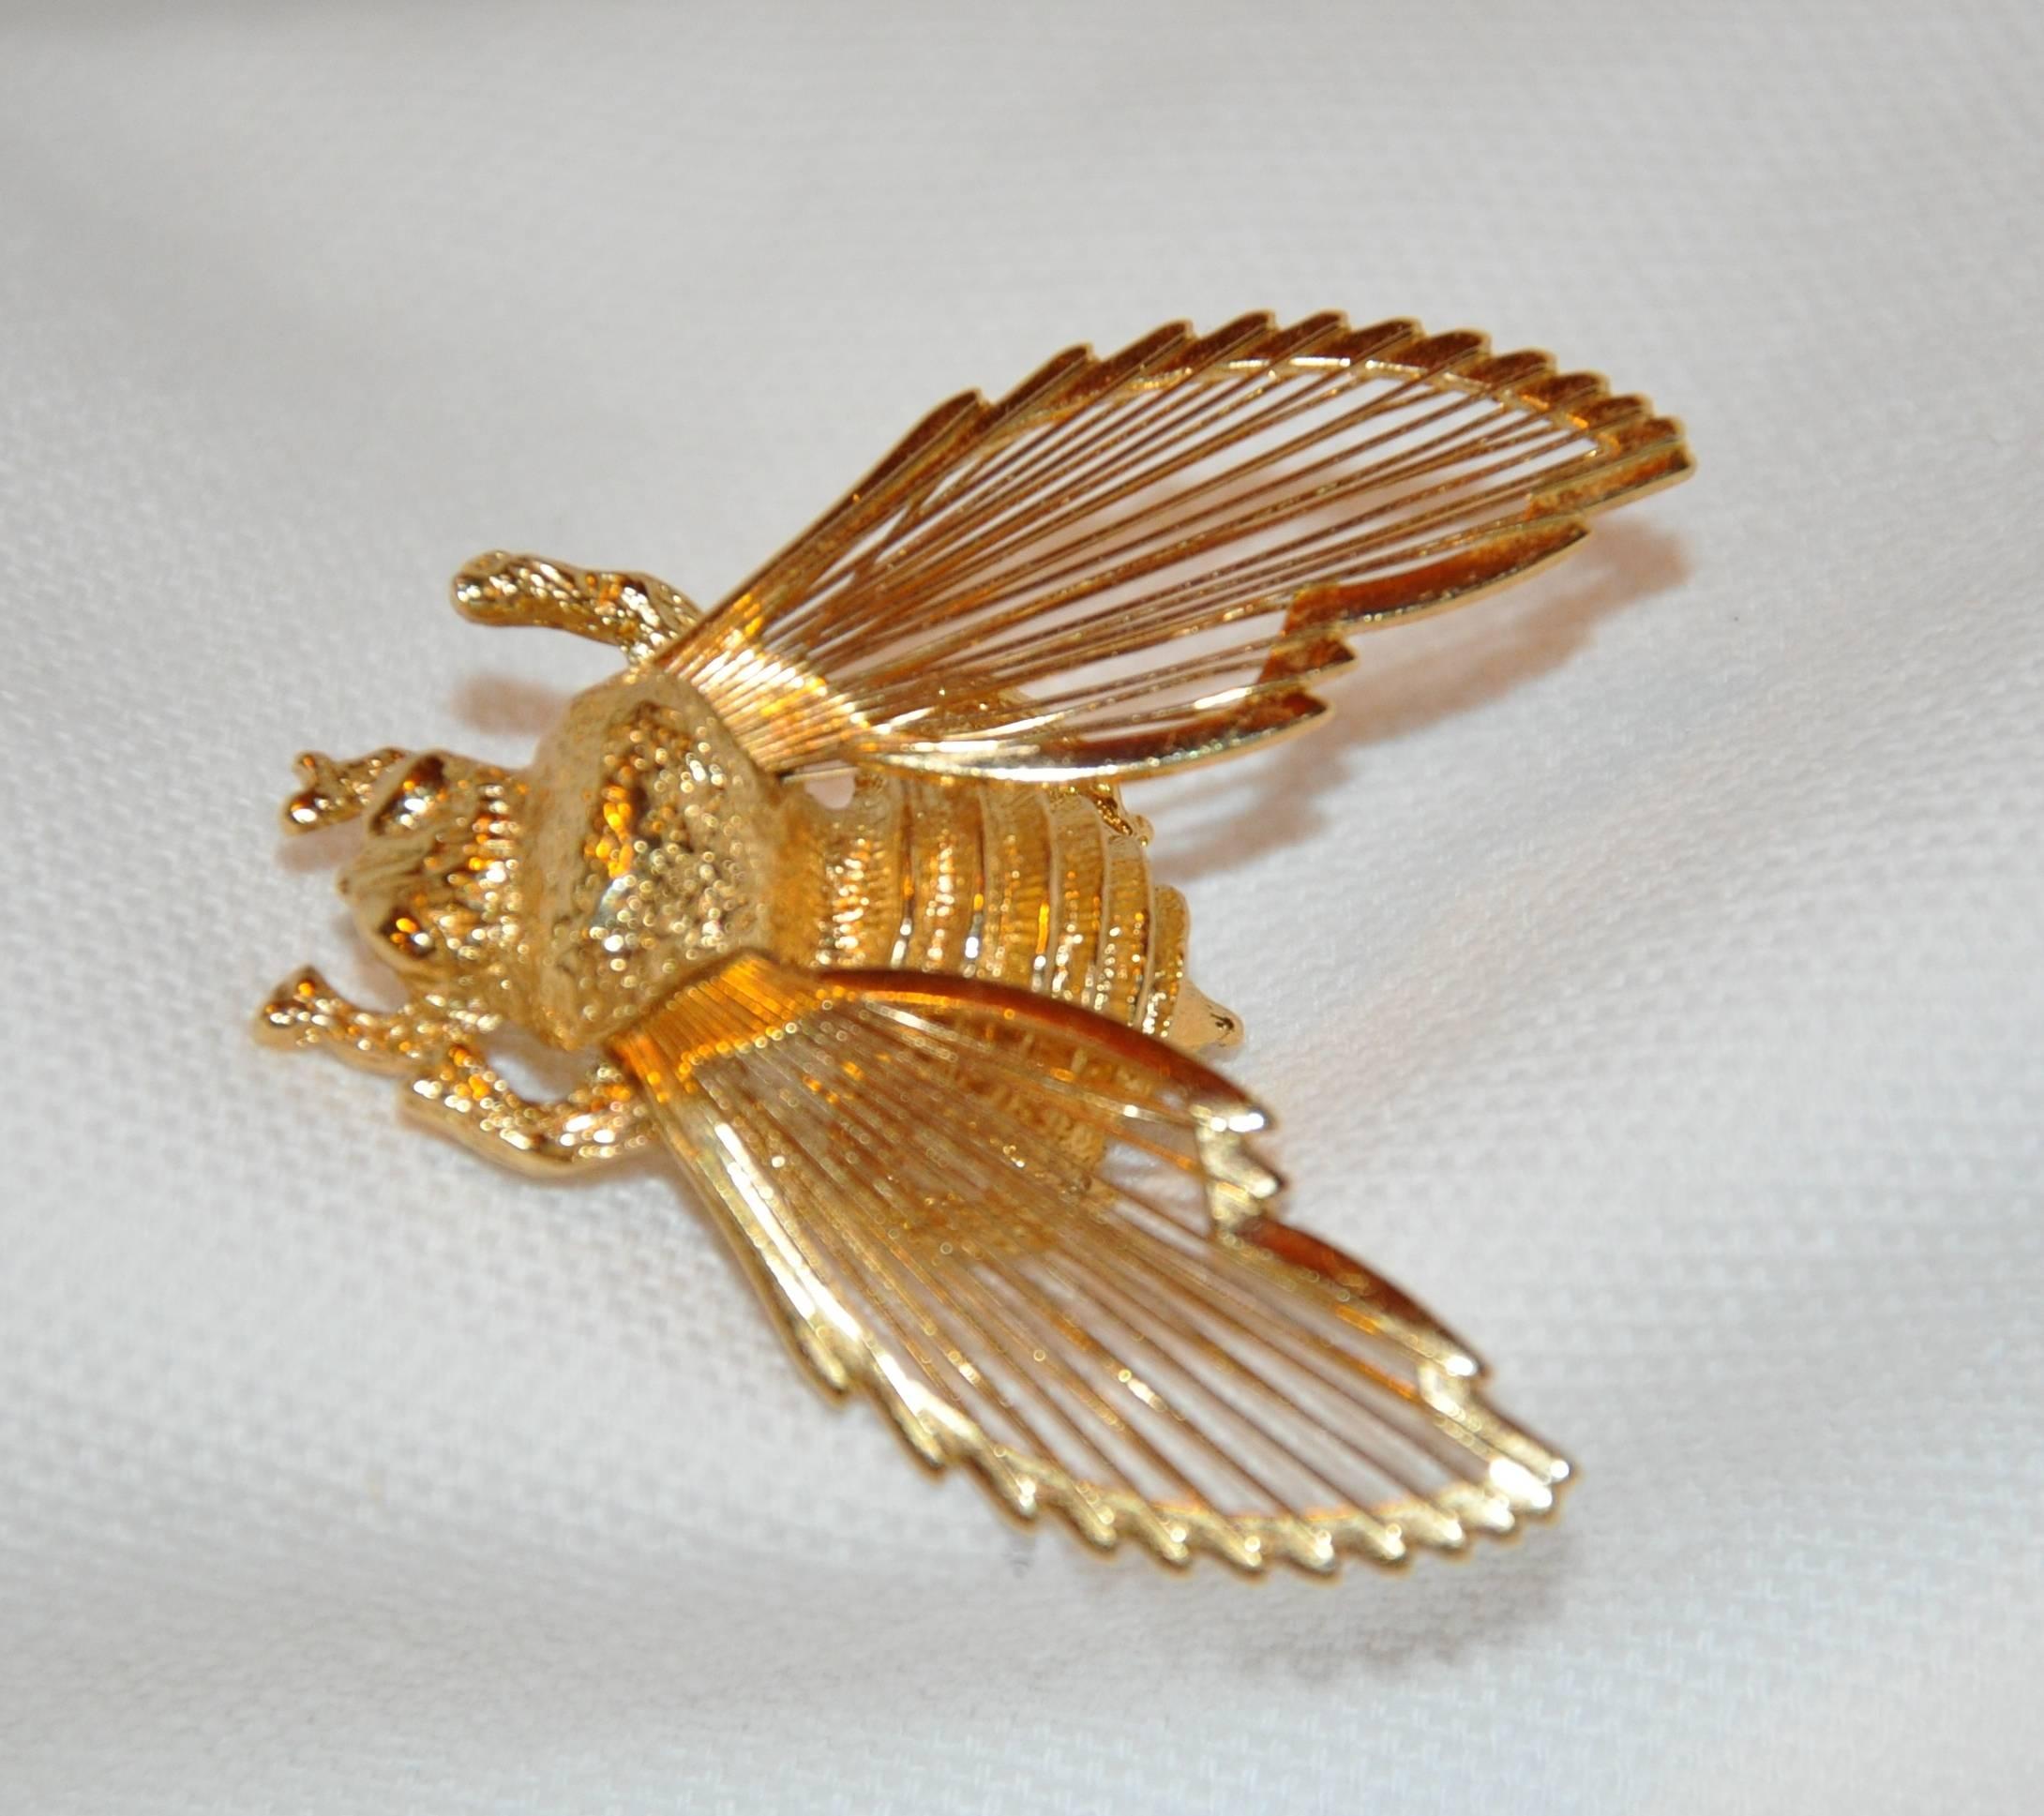        Monet wonderfully detailed gilded gold vermeil hardware "Bumble Bee" brooch is accented with detailed etching and wings resembling a set of musical harps. The length measures 1 1/2 inch, width is 1 7/16 inch, depth is 3/8 inch. Made